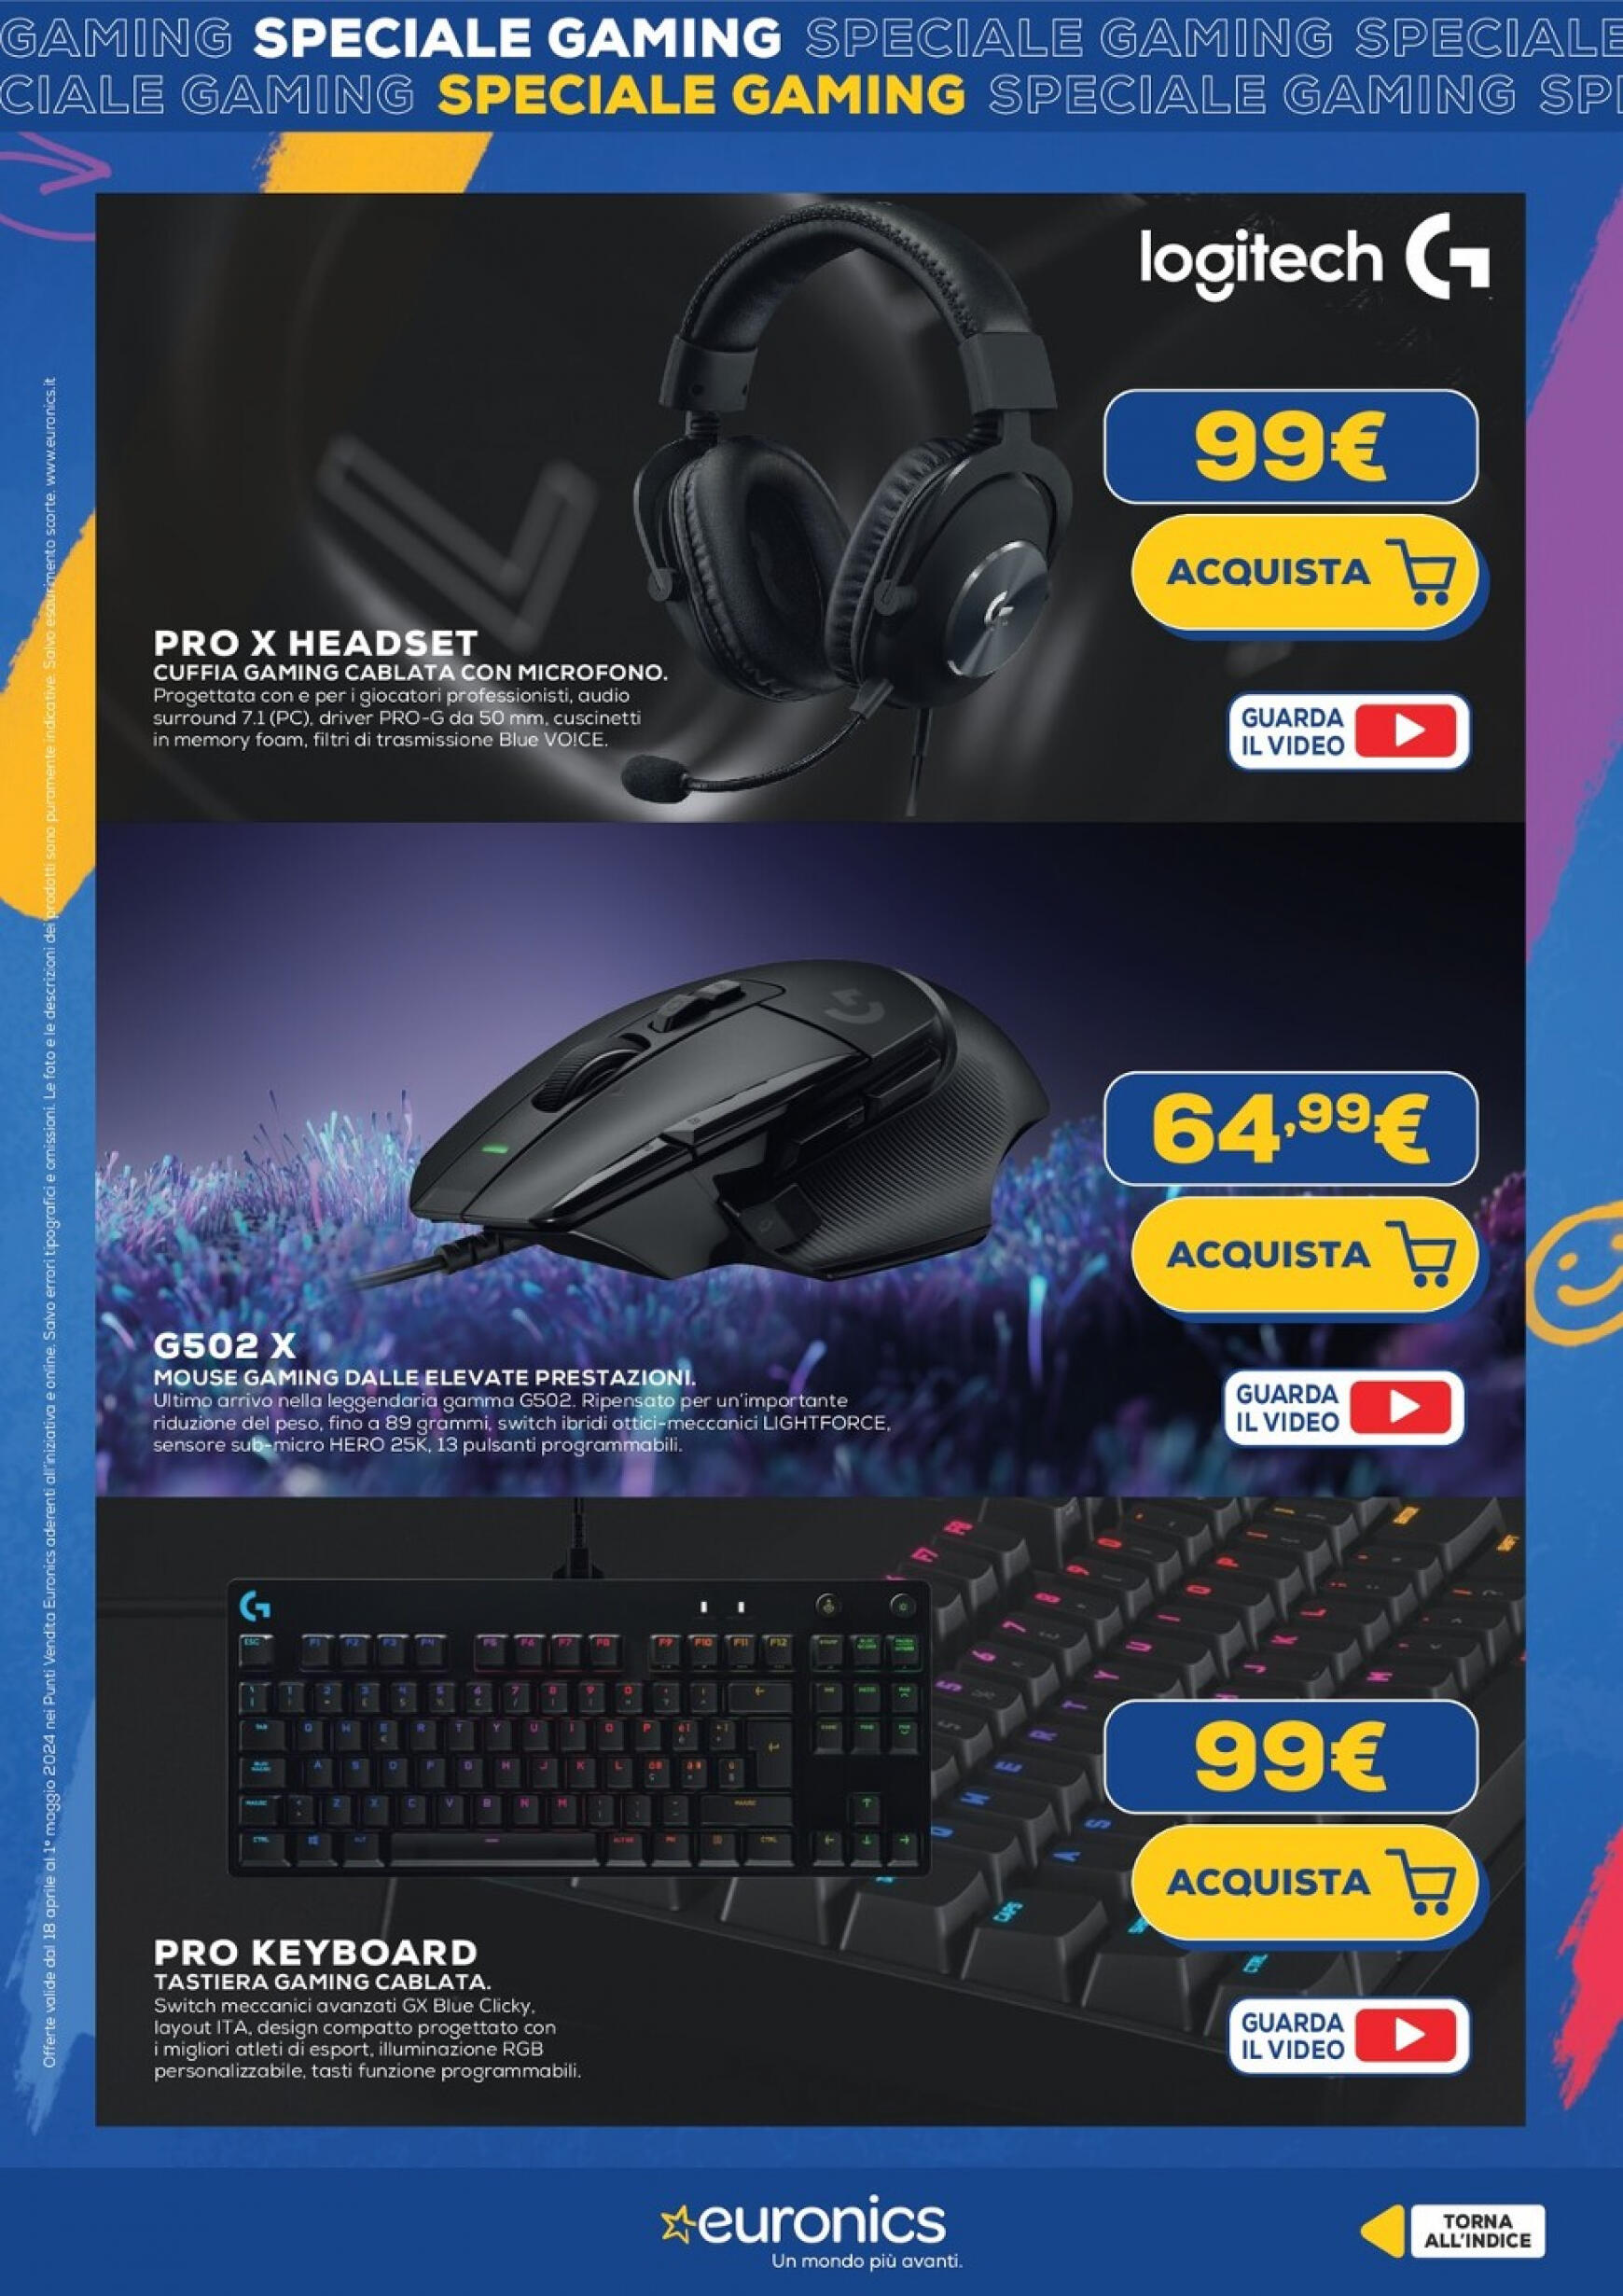 euronics - Nuovo volantino Euronics - Speciale Gaming 18.04. - 01.05. - page: 13